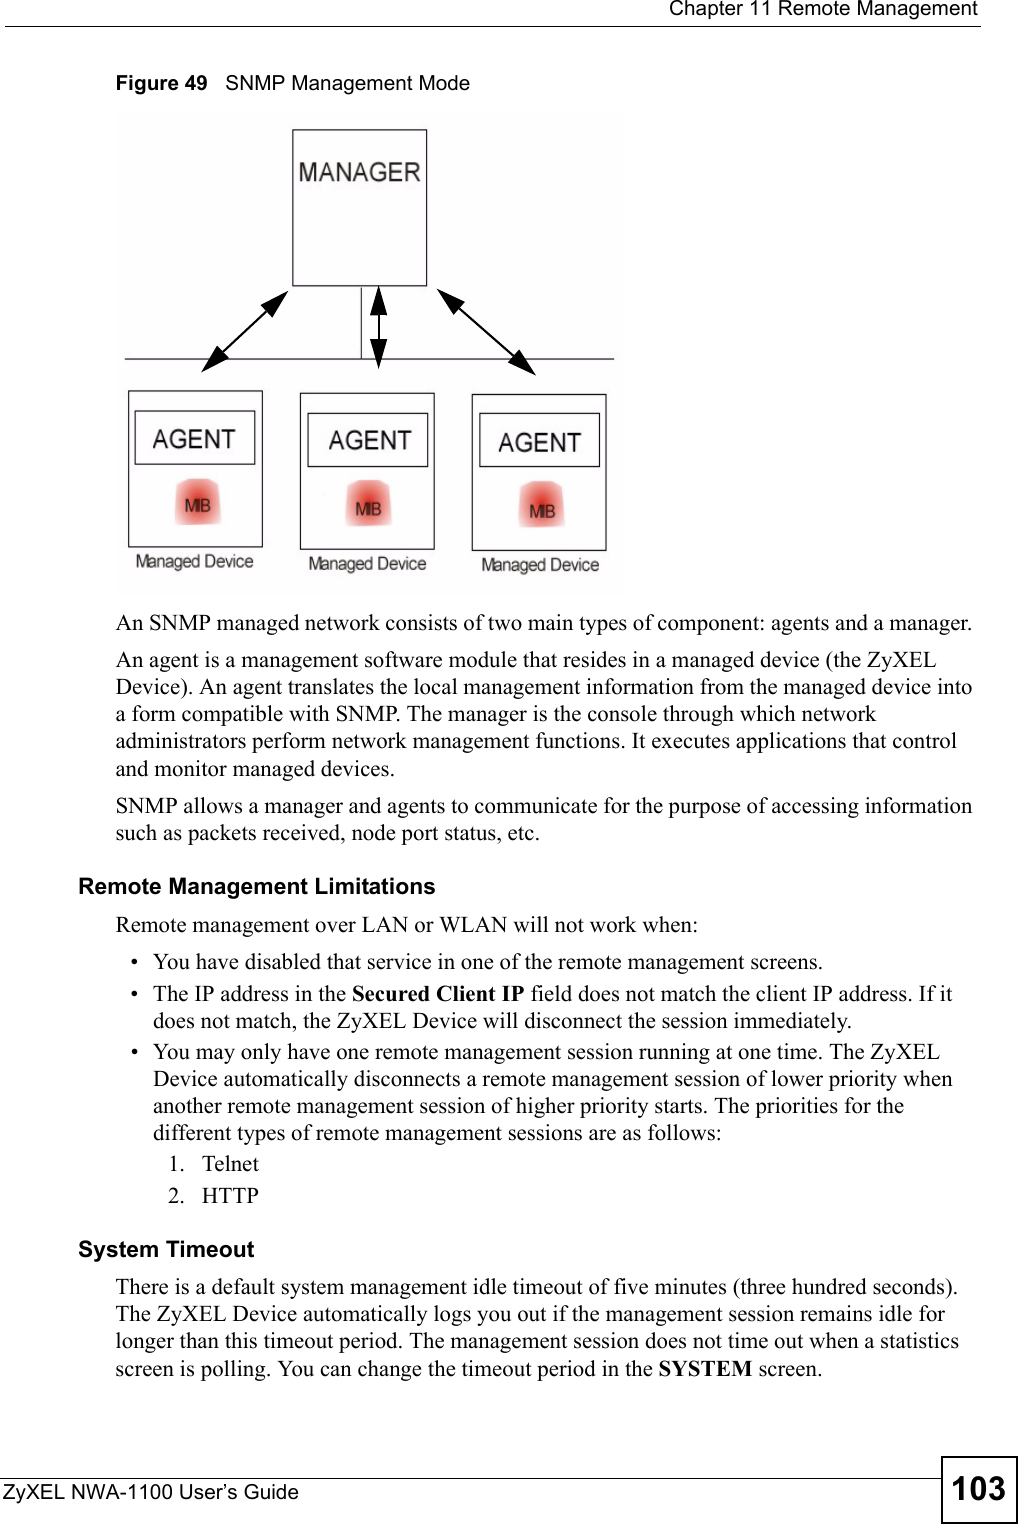  Chapter 11 Remote ManagementZyXEL NWA-1100 User’s Guide 103Figure 49   SNMP Management ModeAn SNMP managed network consists of two main types of component: agents and a manager. An agent is a management software module that resides in a managed device (the ZyXEL Device). An agent translates the local management information from the managed device into a form compatible with SNMP. The manager is the console through which network administrators perform network management functions. It executes applications that control and monitor managed devices. SNMP allows a manager and agents to communicate for the purpose of accessing information such as packets received, node port status, etc.Remote Management LimitationsRemote management over LAN or WLAN will not work when:• You have disabled that service in one of the remote management screens.• The IP address in the Secured Client IP field does not match the client IP address. If it does not match, the ZyXEL Device will disconnect the session immediately.• You may only have one remote management session running at one time. The ZyXEL Device automatically disconnects a remote management session of lower priority when another remote management session of higher priority starts. The priorities for the different types of remote management sessions are as follows:1.   Telnet2.   HTTPSystem TimeoutThere is a default system management idle timeout of five minutes (three hundred seconds). The ZyXEL Device automatically logs you out if the management session remains idle for longer than this timeout period. The management session does not time out when a statistics screen is polling. You can change the timeout period in the SYSTEM screen.